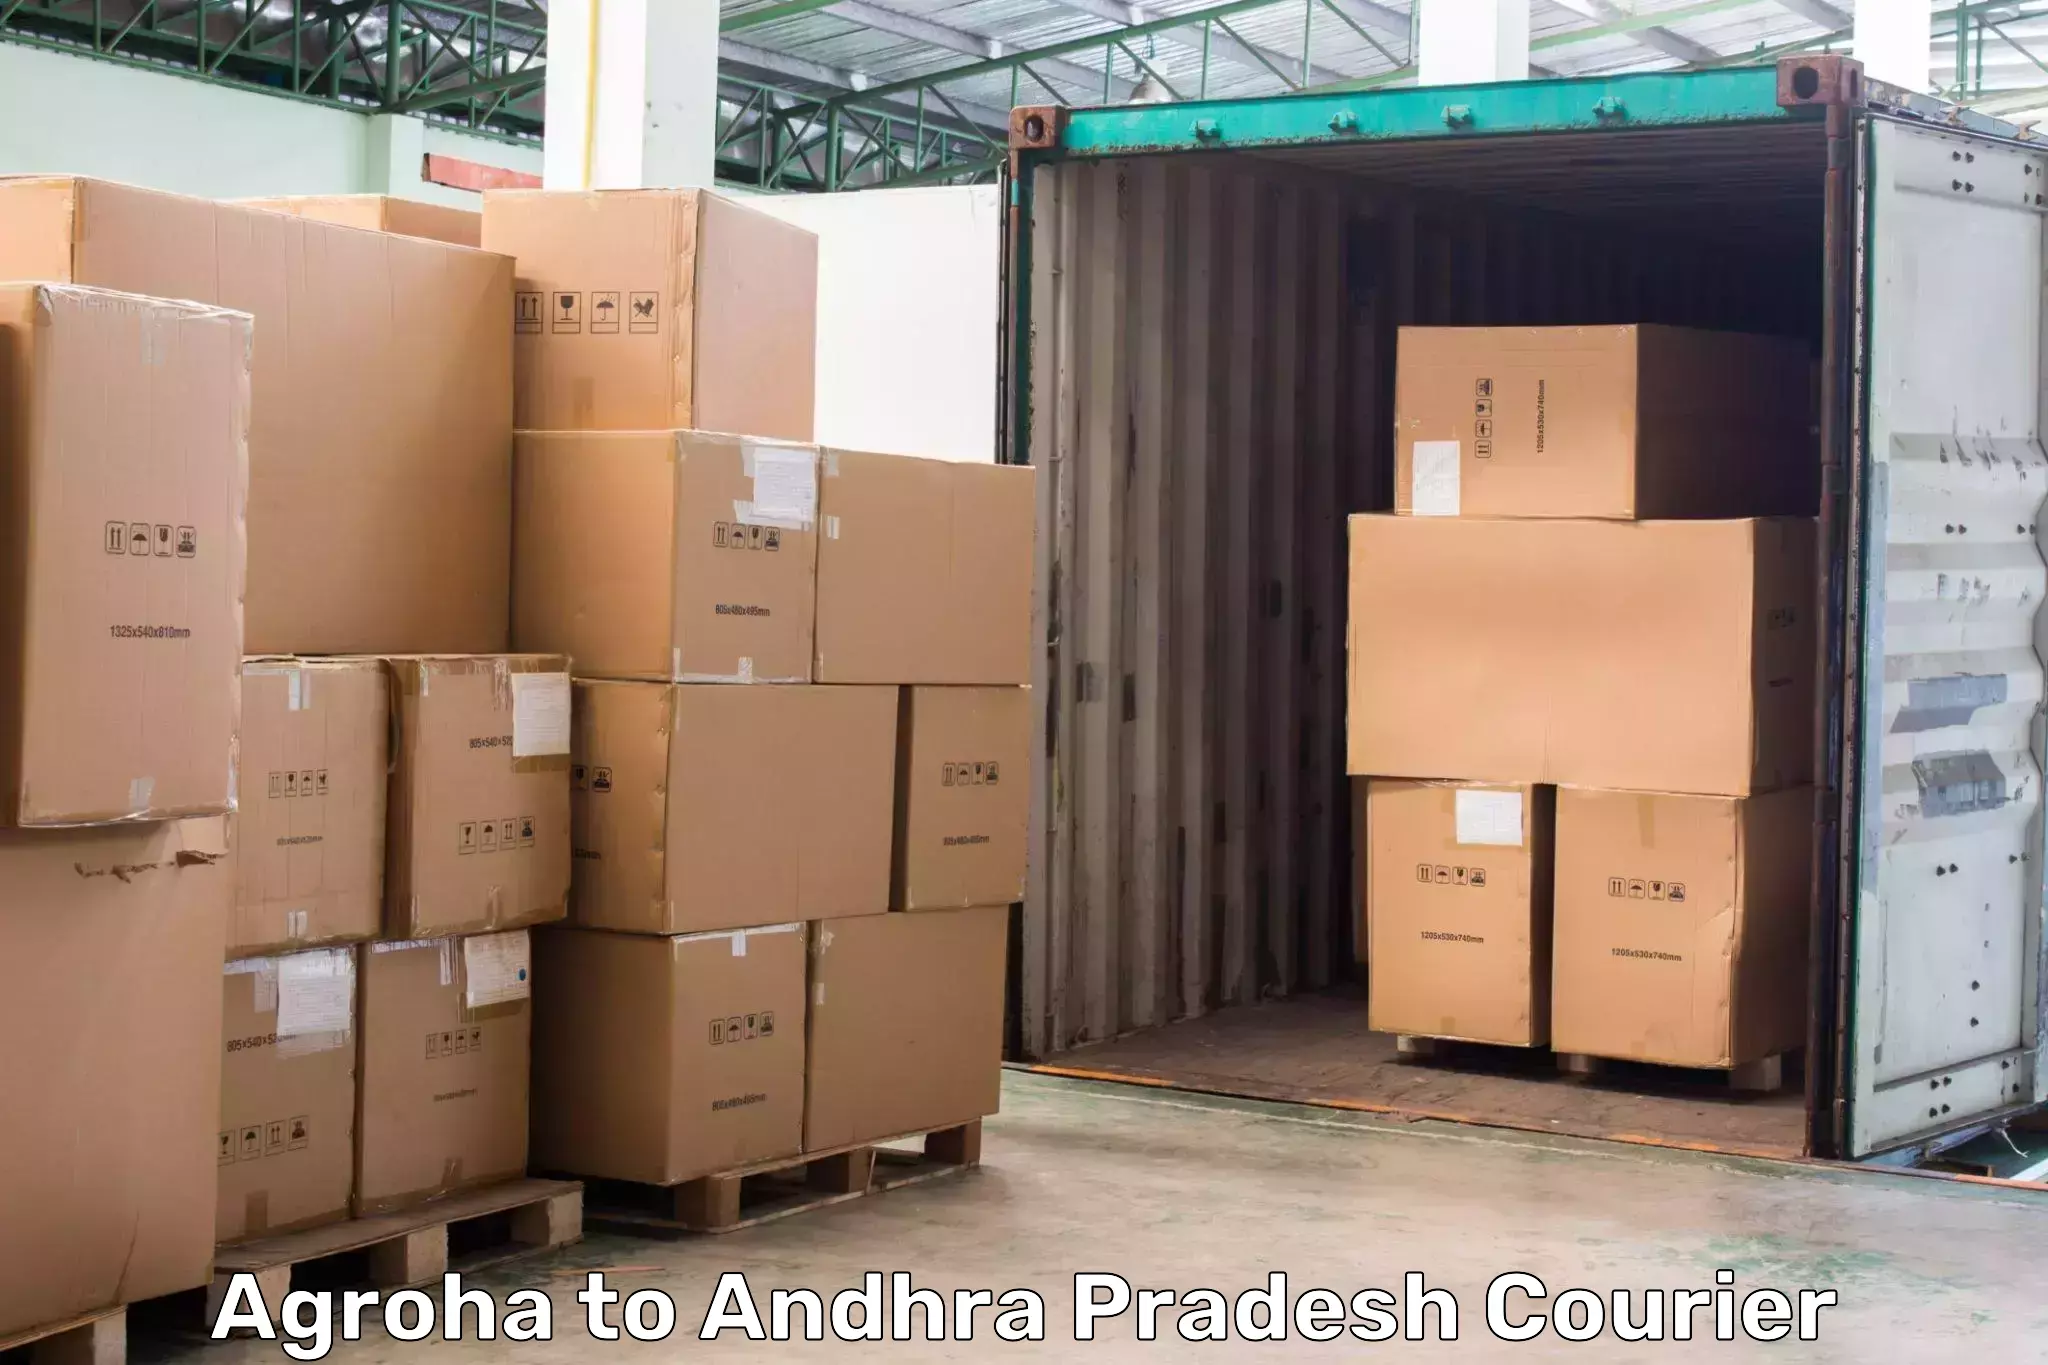 24/7 courier service in Agroha to Visakhapatnam Port